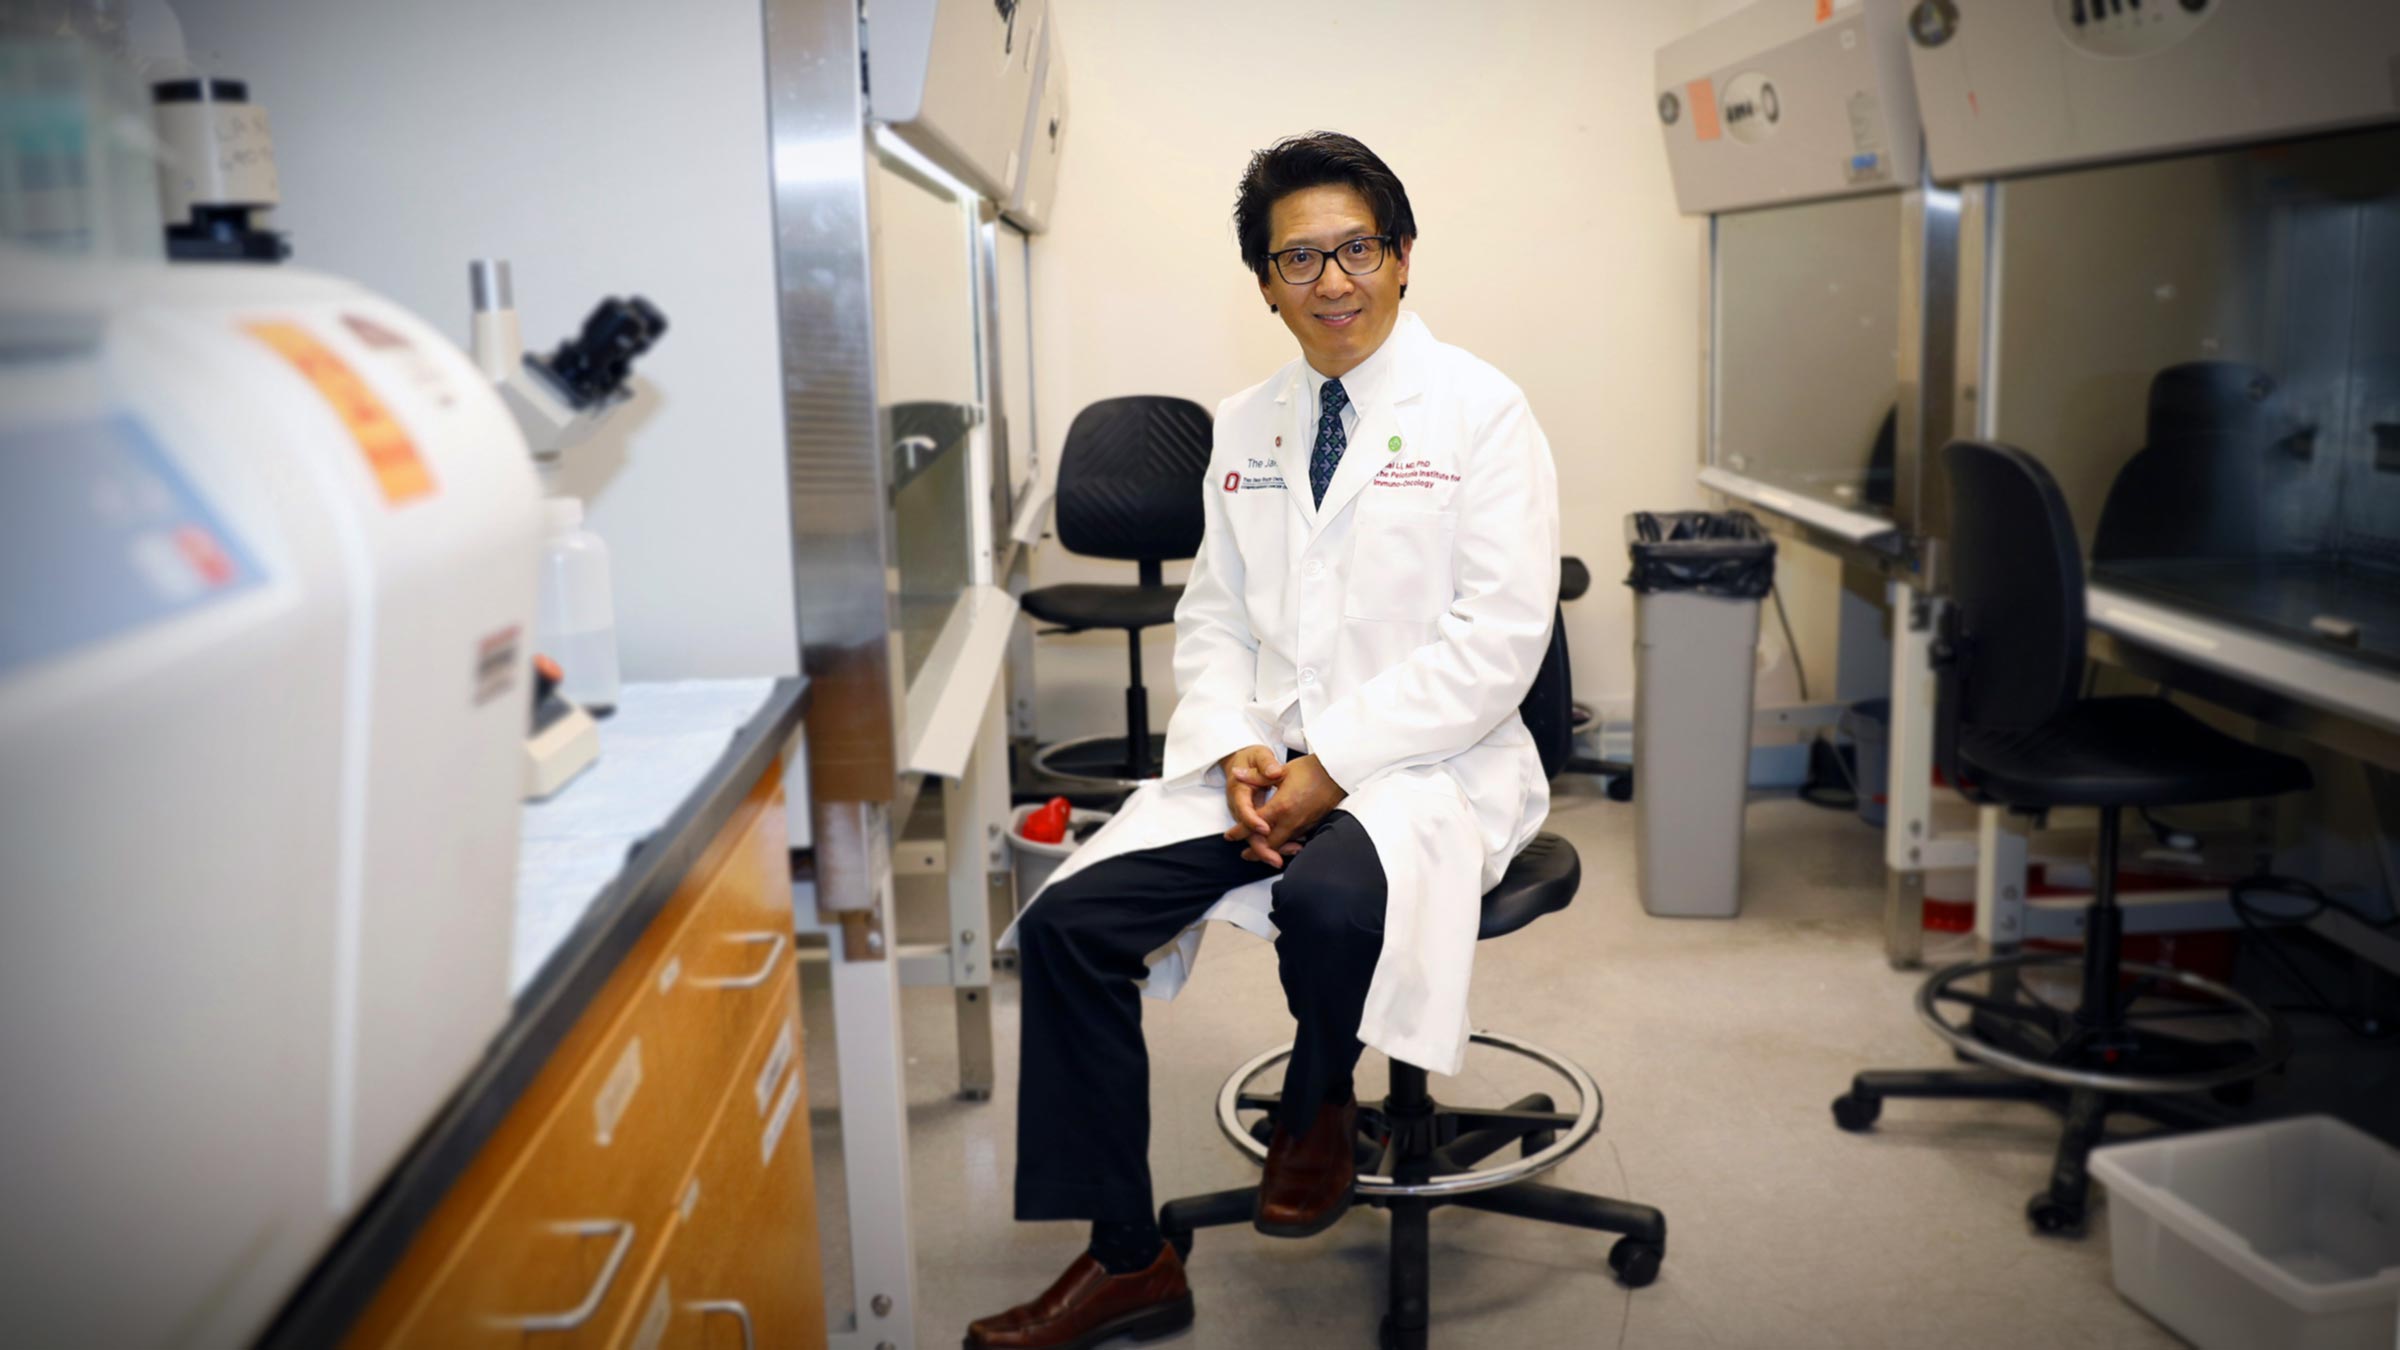 Zihai Li, MD PhD sitting in his lab at Ohio State